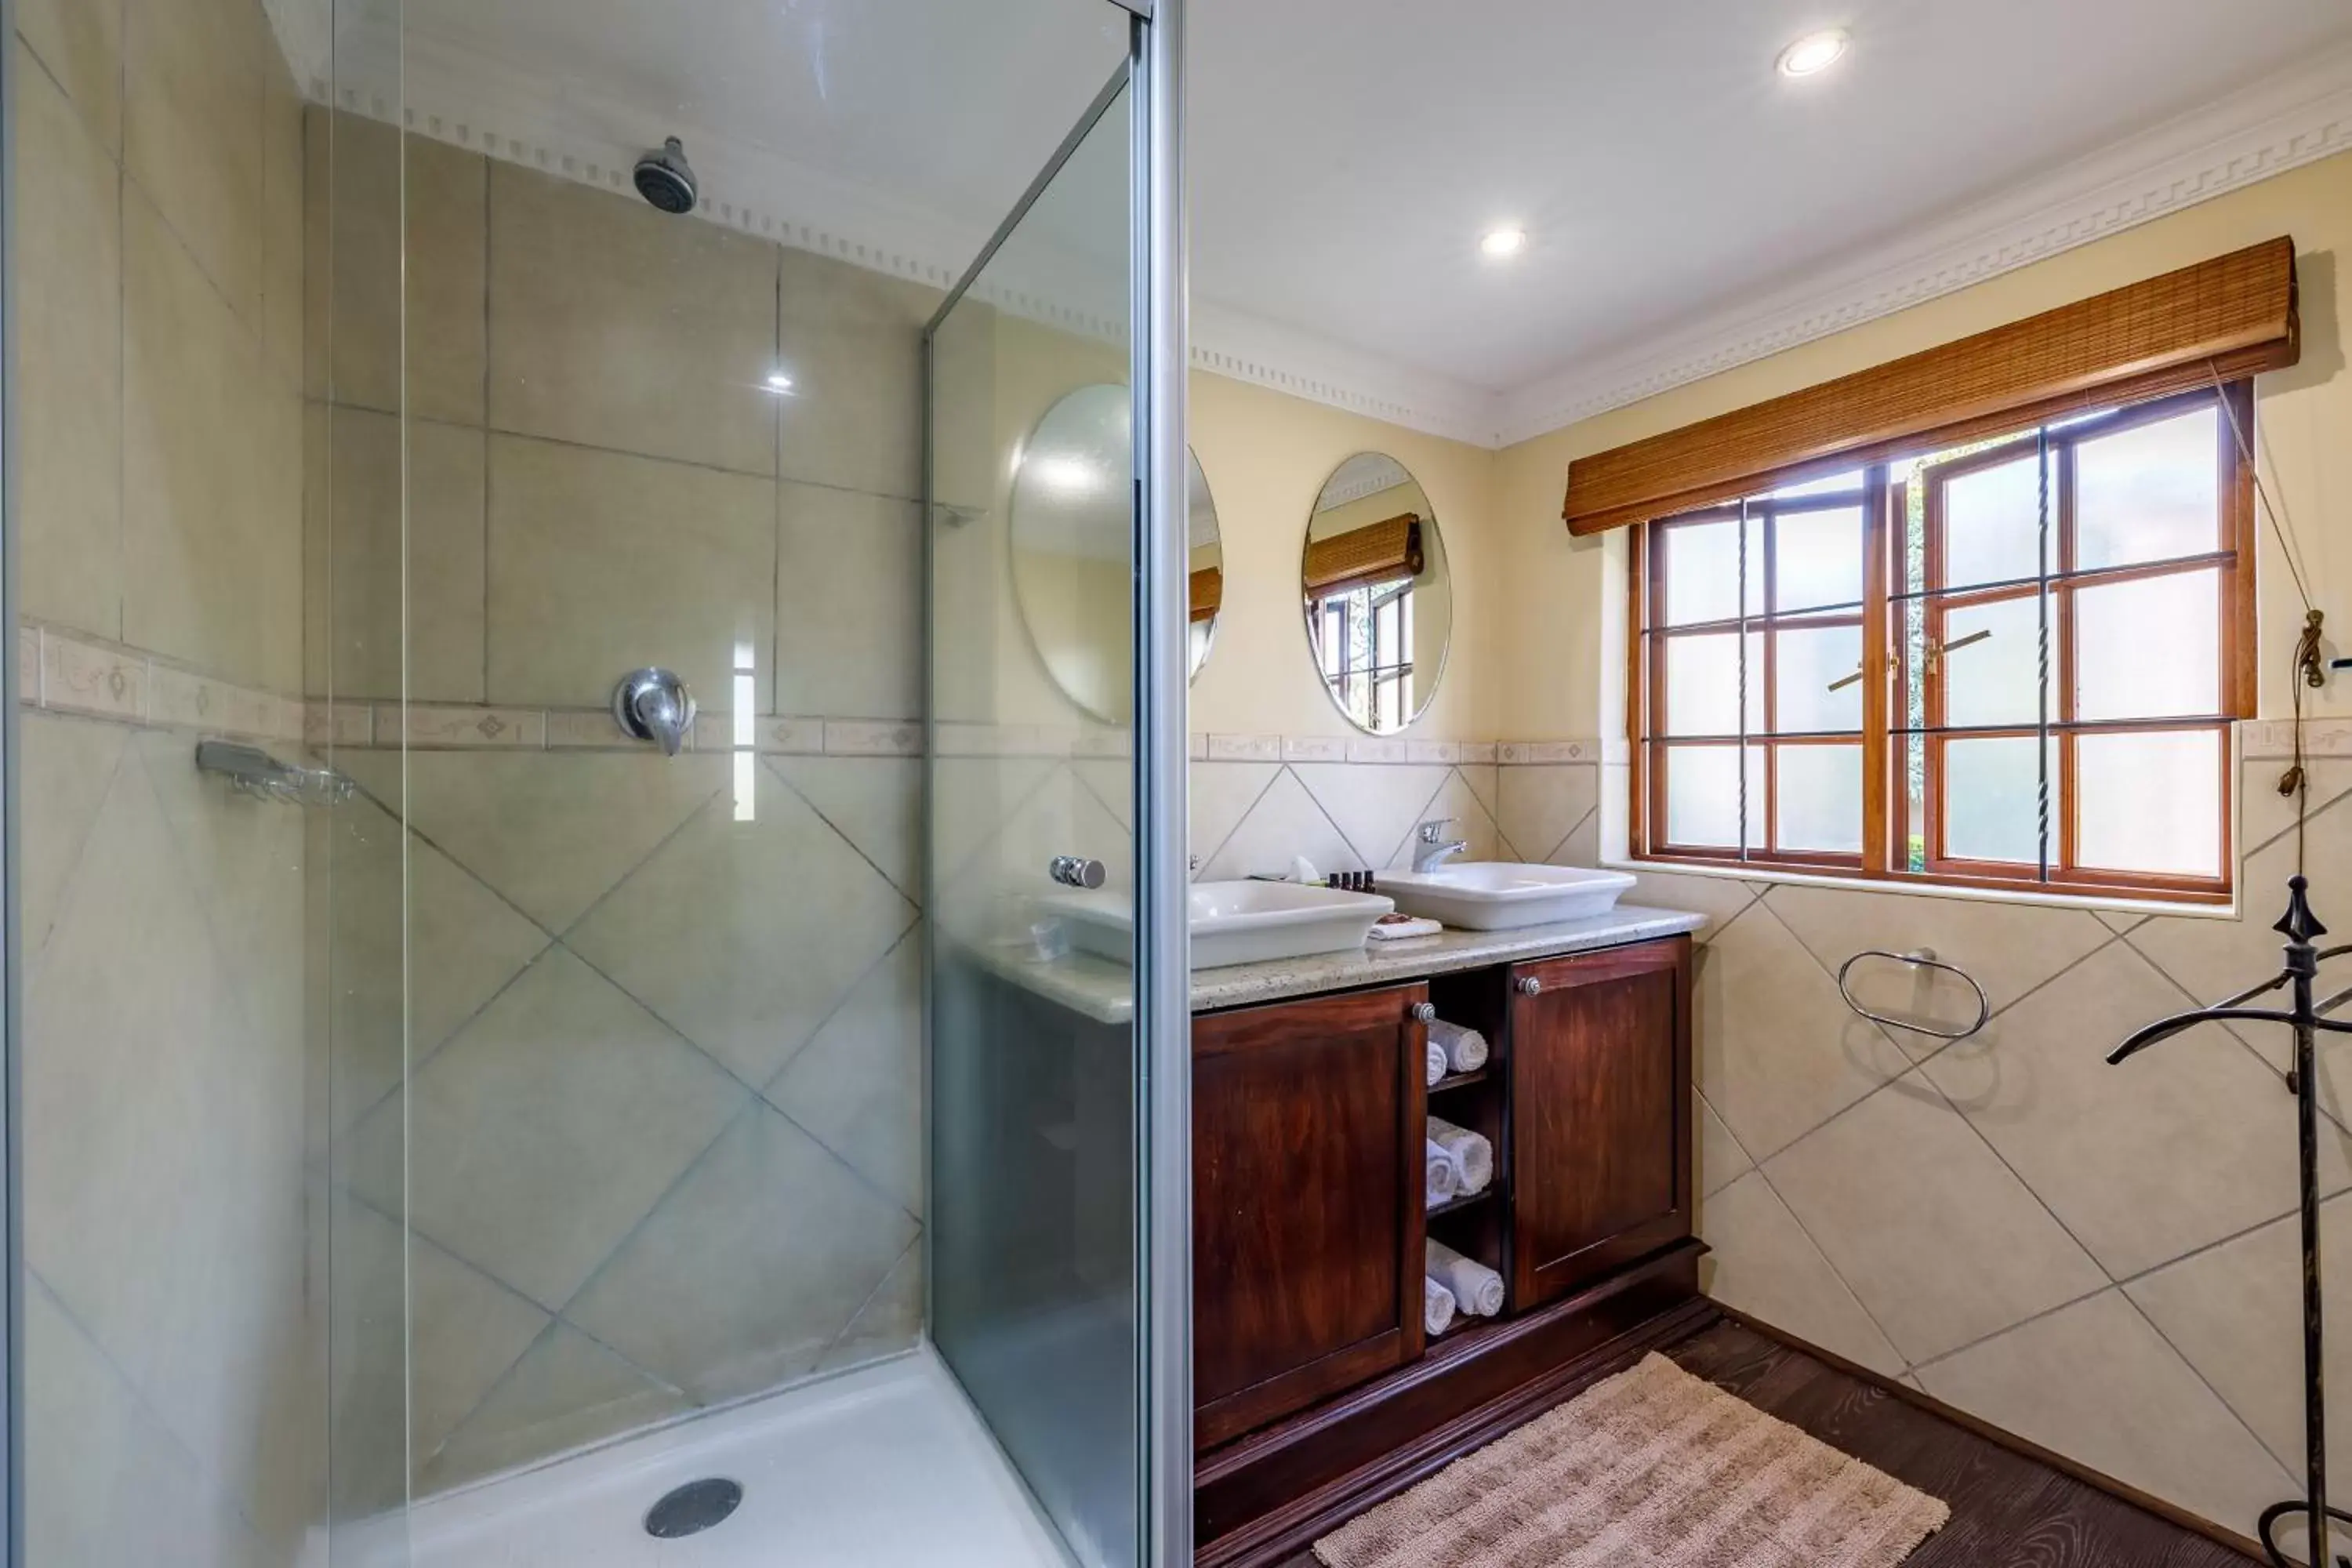 Bathroom in Country Lane Lodge